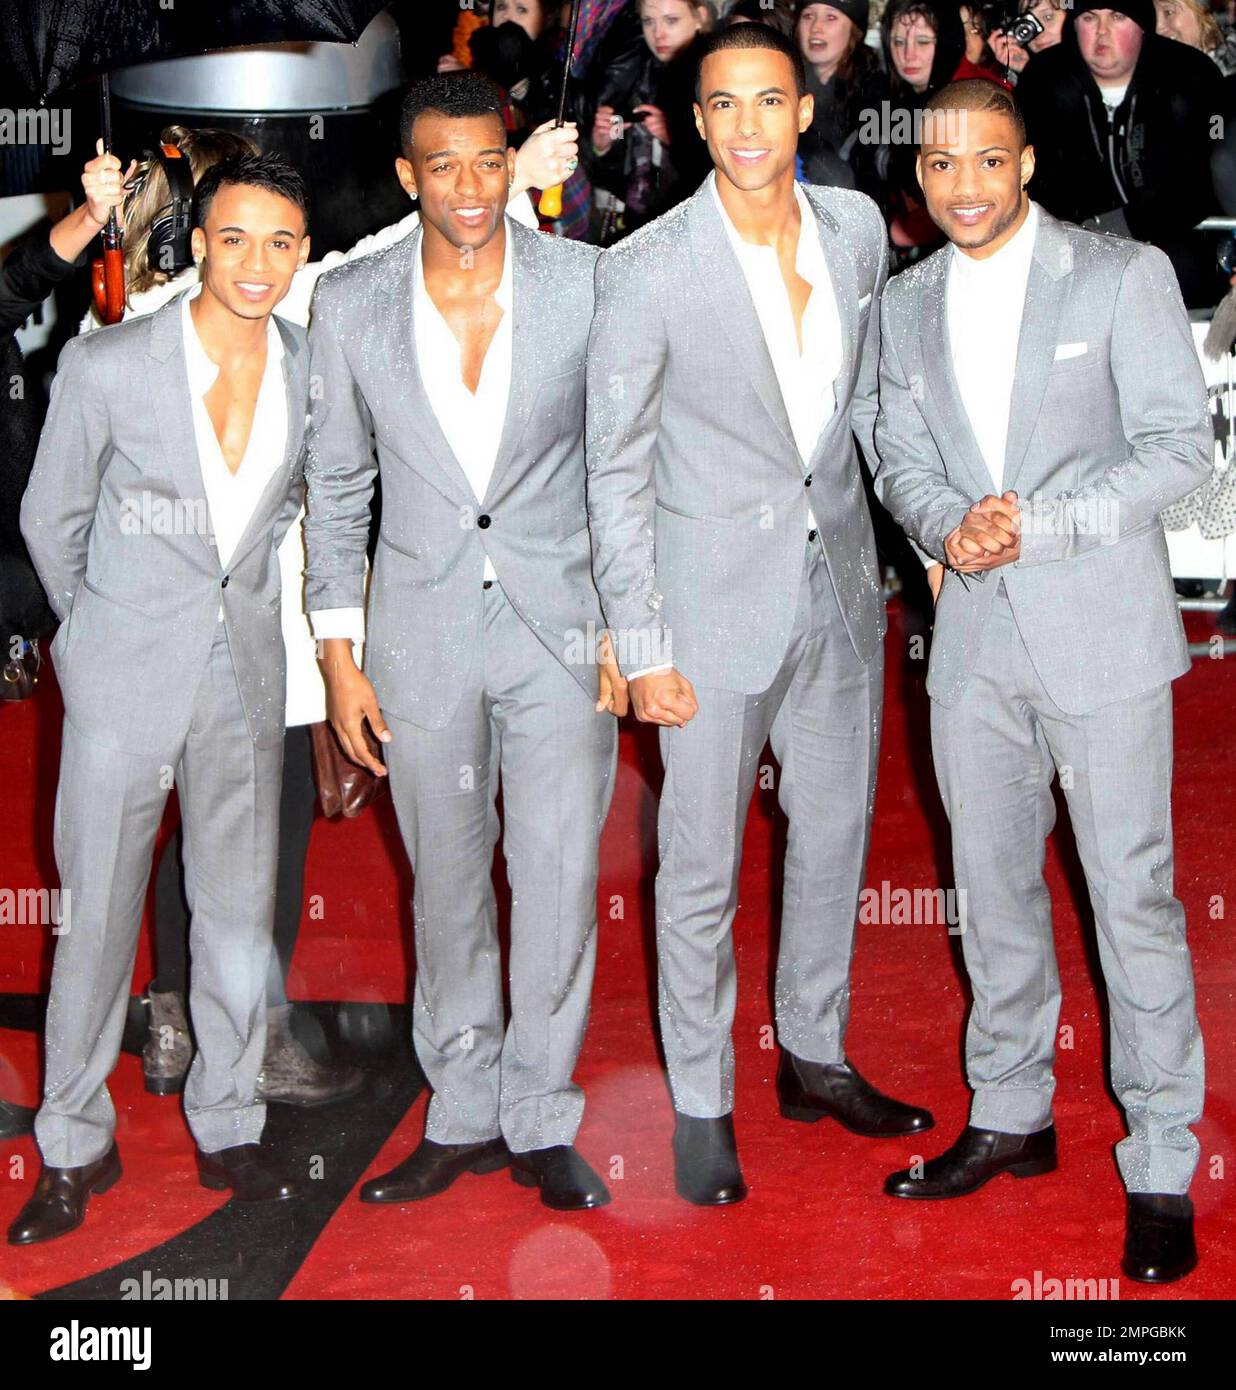 Aston Merrygold, Marvin Humes, Jonathan (JB) Gill and Oritse Williams of JLS (Jack the Lad Swing) walk the red carpet at The Brit Awards 2010 at Earls Court.  London, UK. 2/16/2010.    . Stock Photo